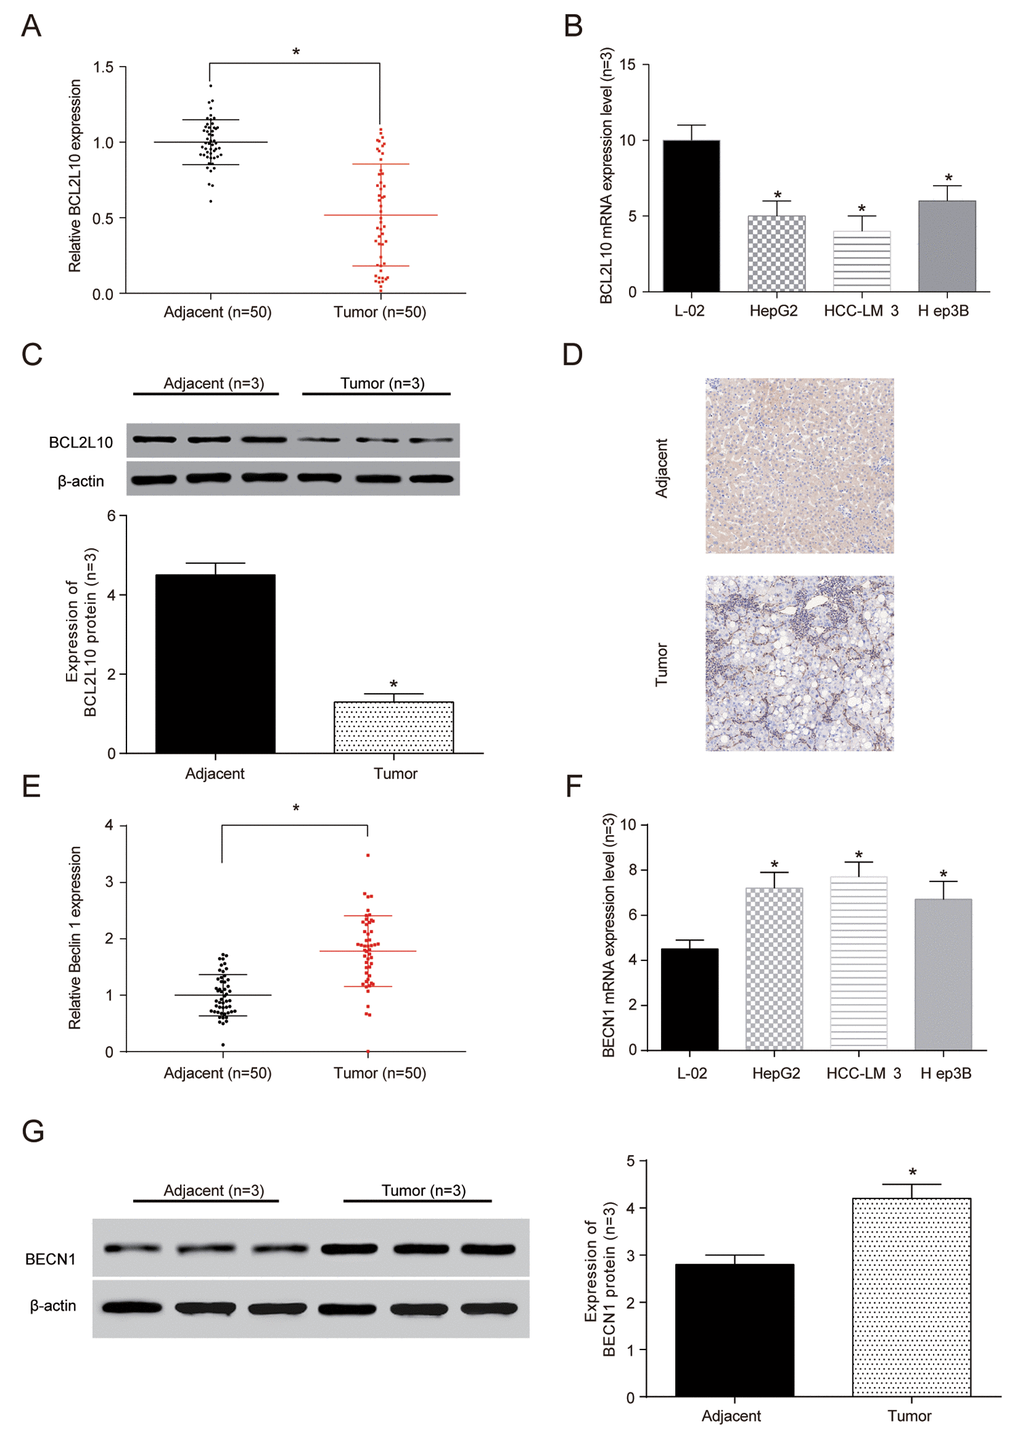 The expression ofBCL2L10 was low in hepatocellular carcinoma (HCC) tissues and cells. (A) The expression of BCL2L10 mRNA in HCC detected by qRT-PCR. (B) The expression of BCL2L10 in L-02 normal liver cells and 3 groups of hepatoma cells detected by qRT-PCR. (C) Western Blot showed the low expression of BCL2L10 in HCC tissues. (D) Immunohistochemistry showed that the normal liver tissues had more brown granules than HCC tissues (× 40). * PE) The expression of BECN1 mRNA in L-02 normal liver cells and 3 groups of hepatoma cells detected by qRT-PCR. (F) The expression of BECN1 in L-02 normal liver cells and 3 groups of hepatoma cells detected by qRT-PCR. (G) Western Blot showed the low expression of BECN1 in HCC tissues.